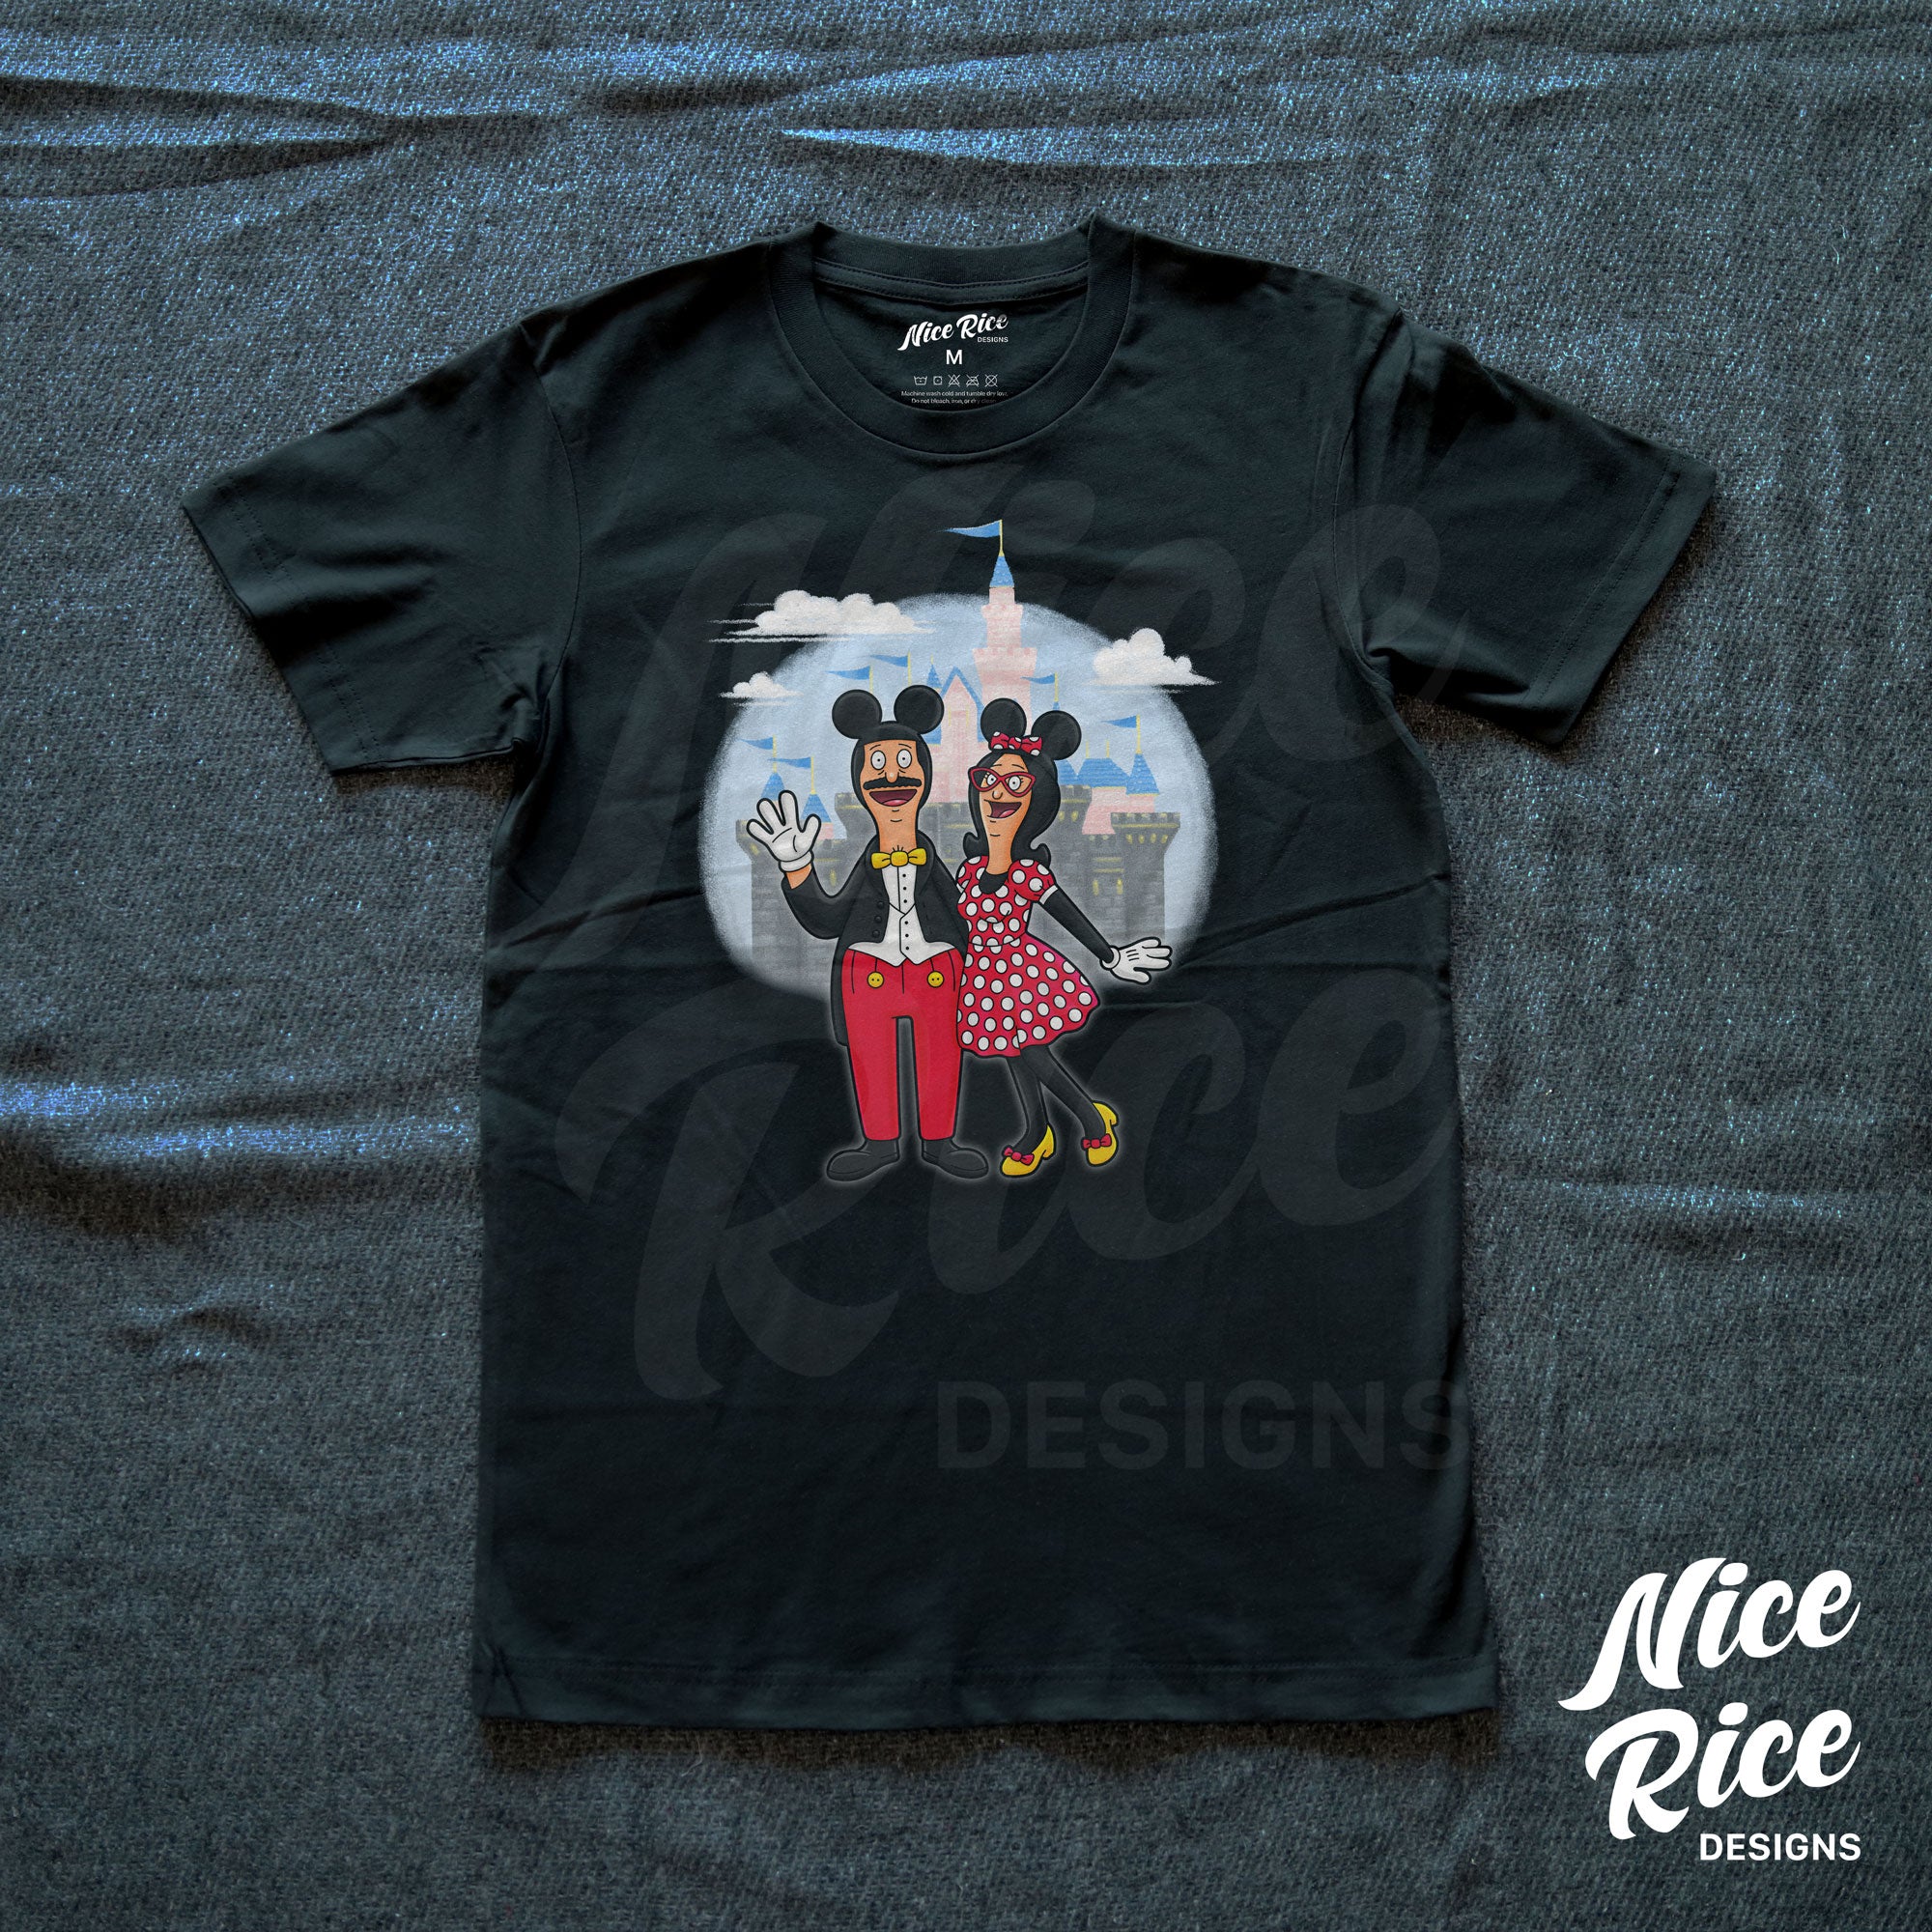 Magical Couple Shirt by Nice Rice Designs